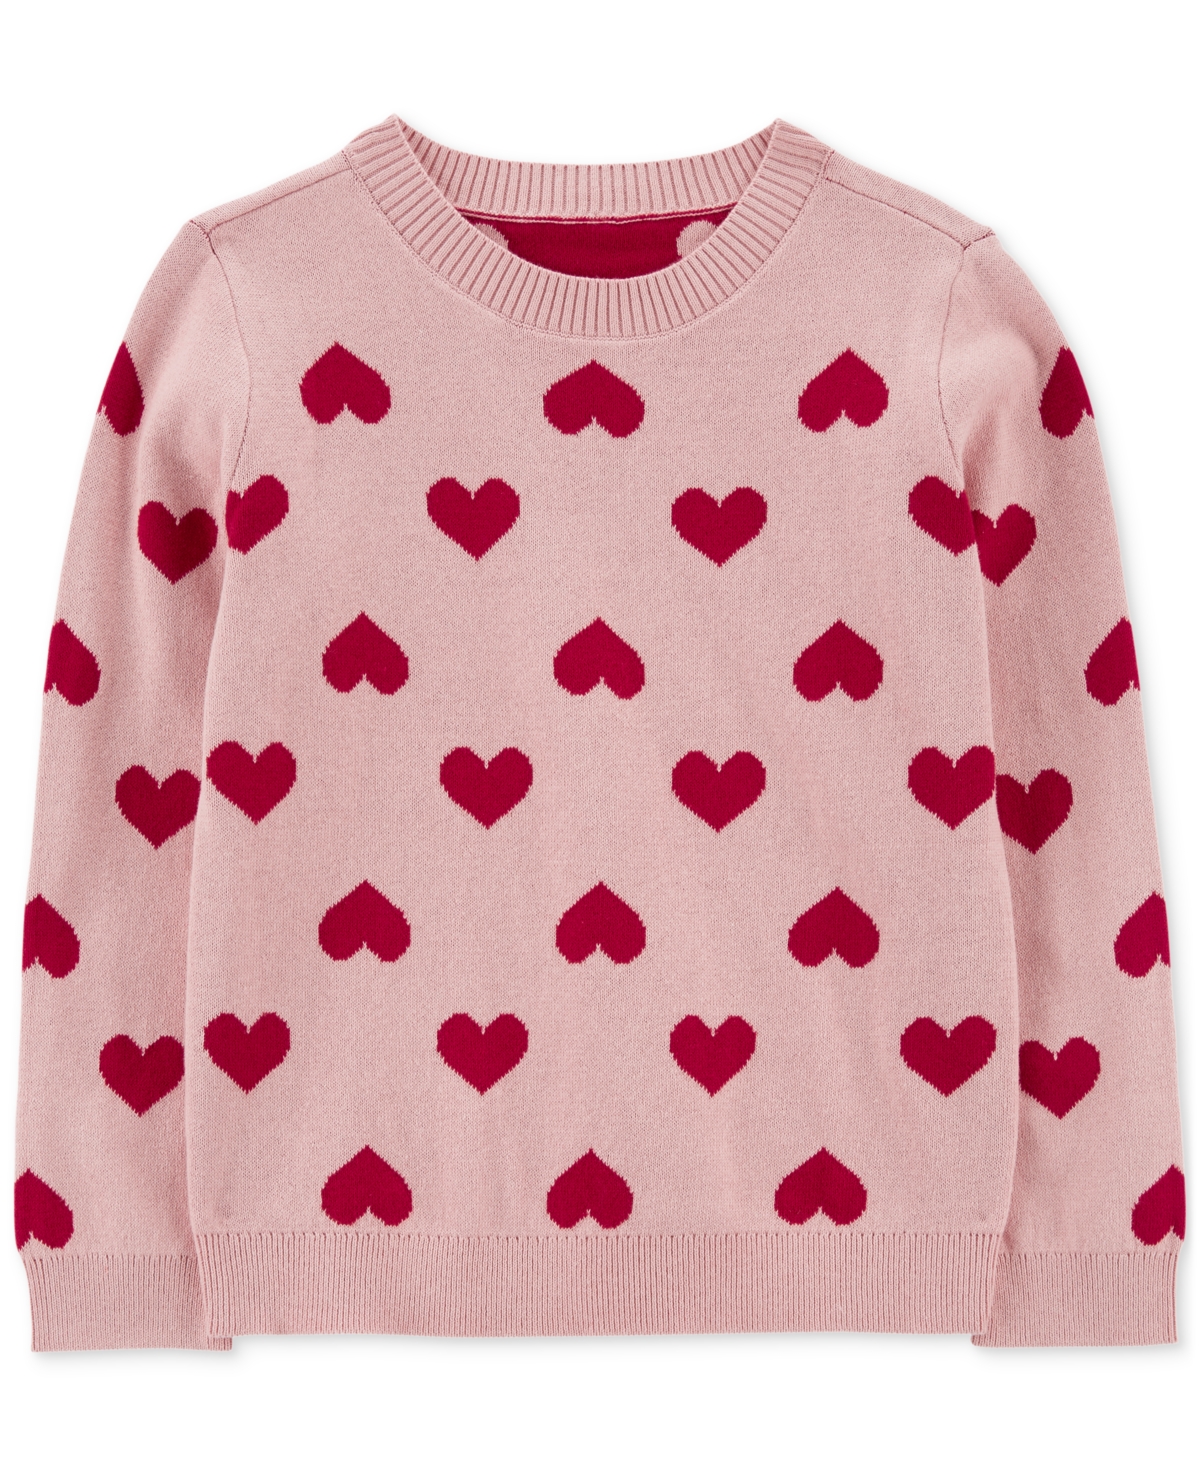 Carter's Kids' Big Girls Cotton Hearts Sweater In Pink